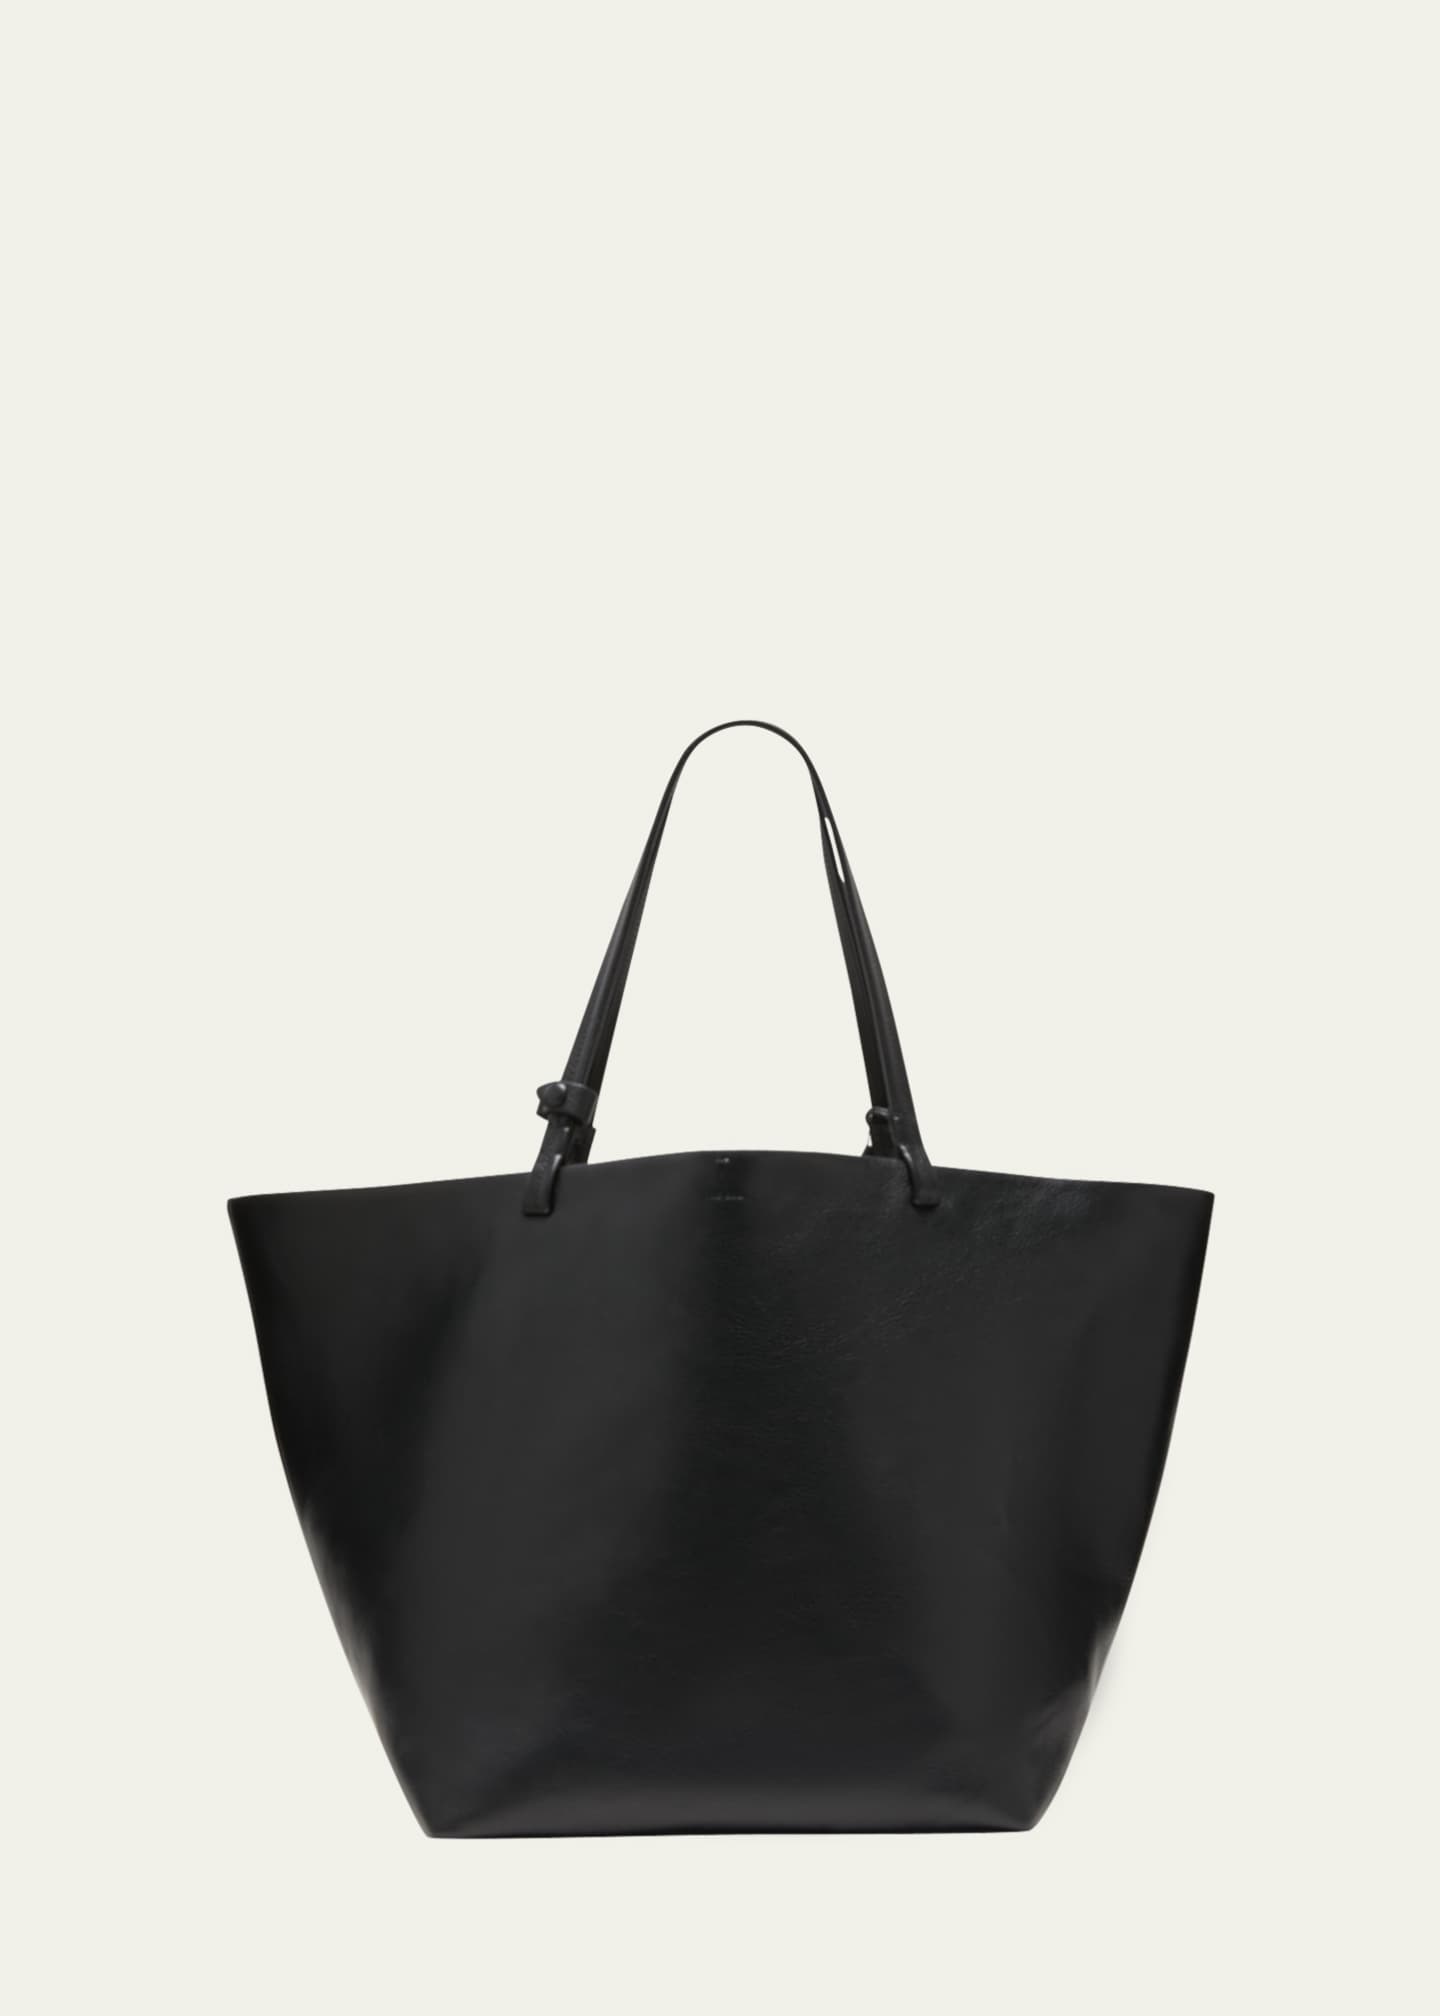 LUXE Brand Shop - Bags, Accessories, Spa Bag